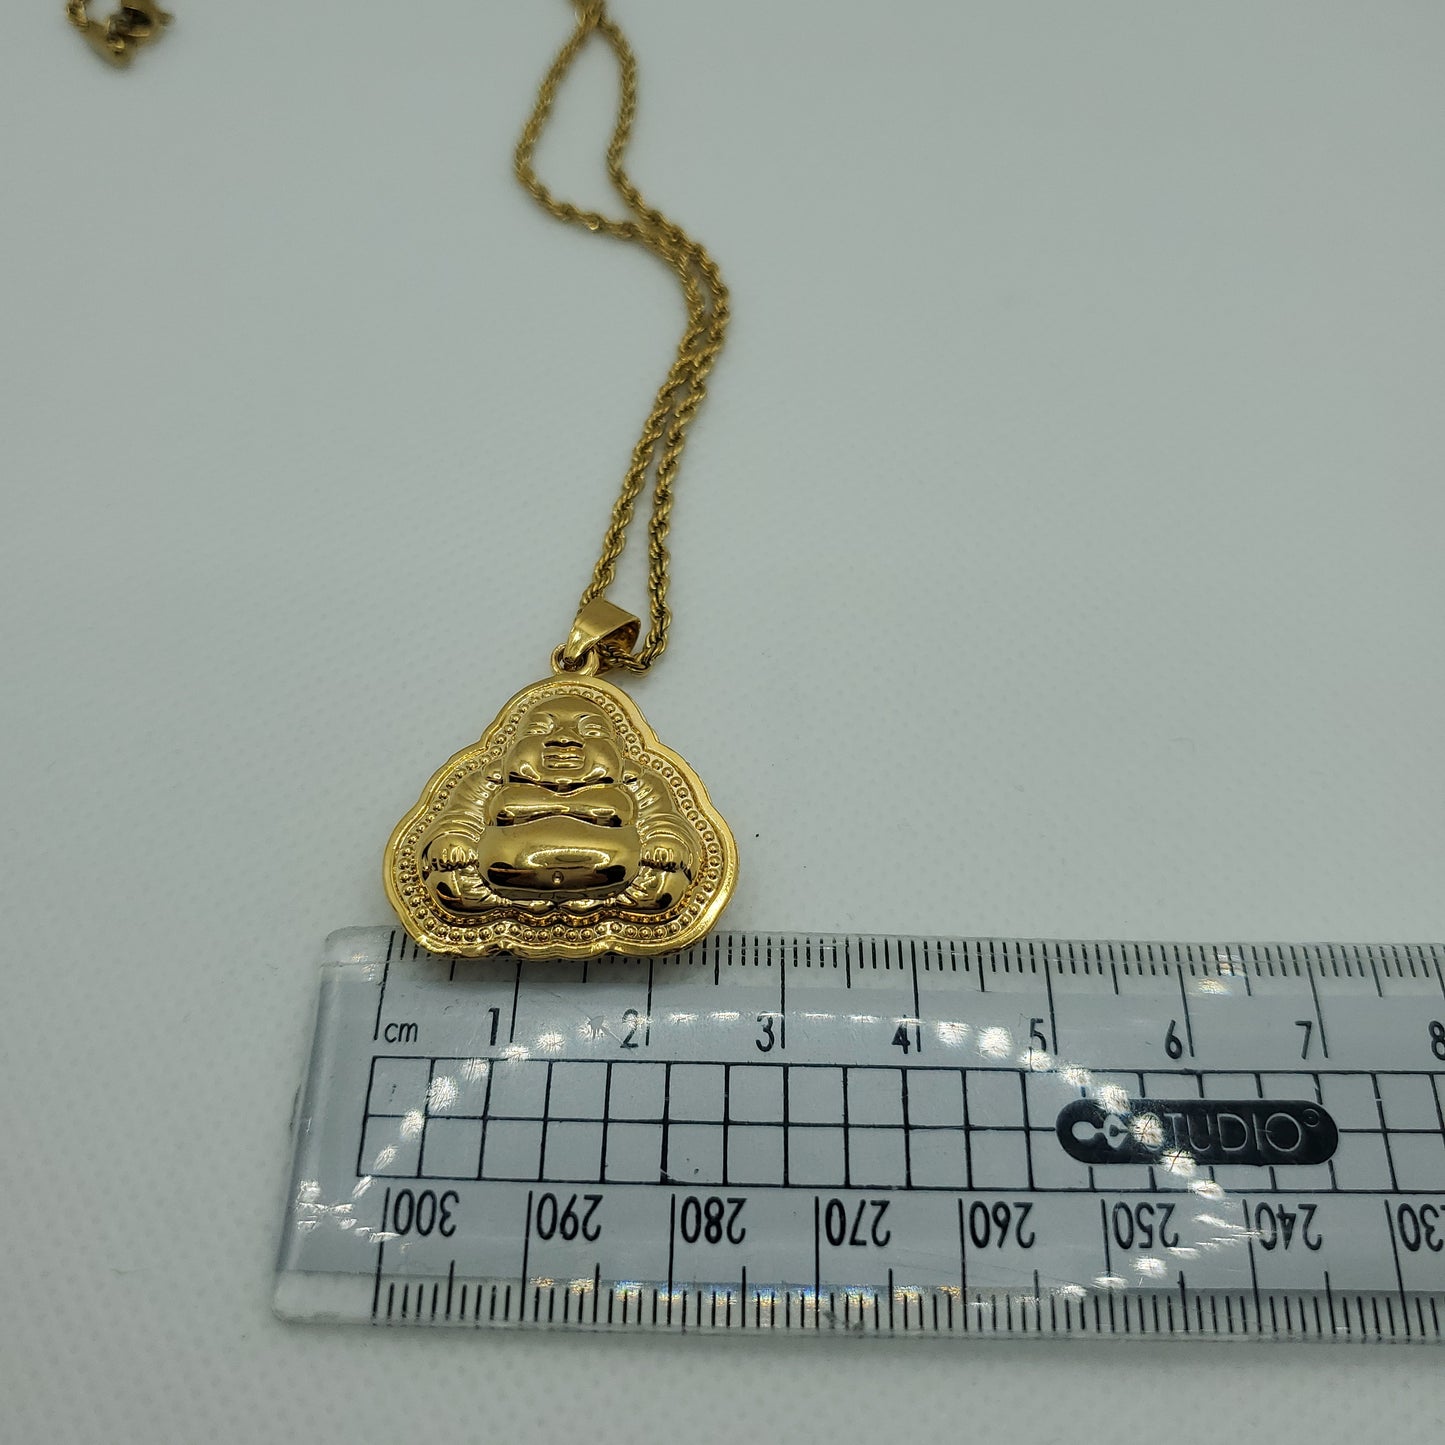 Buddha Necklace - Gold Plated